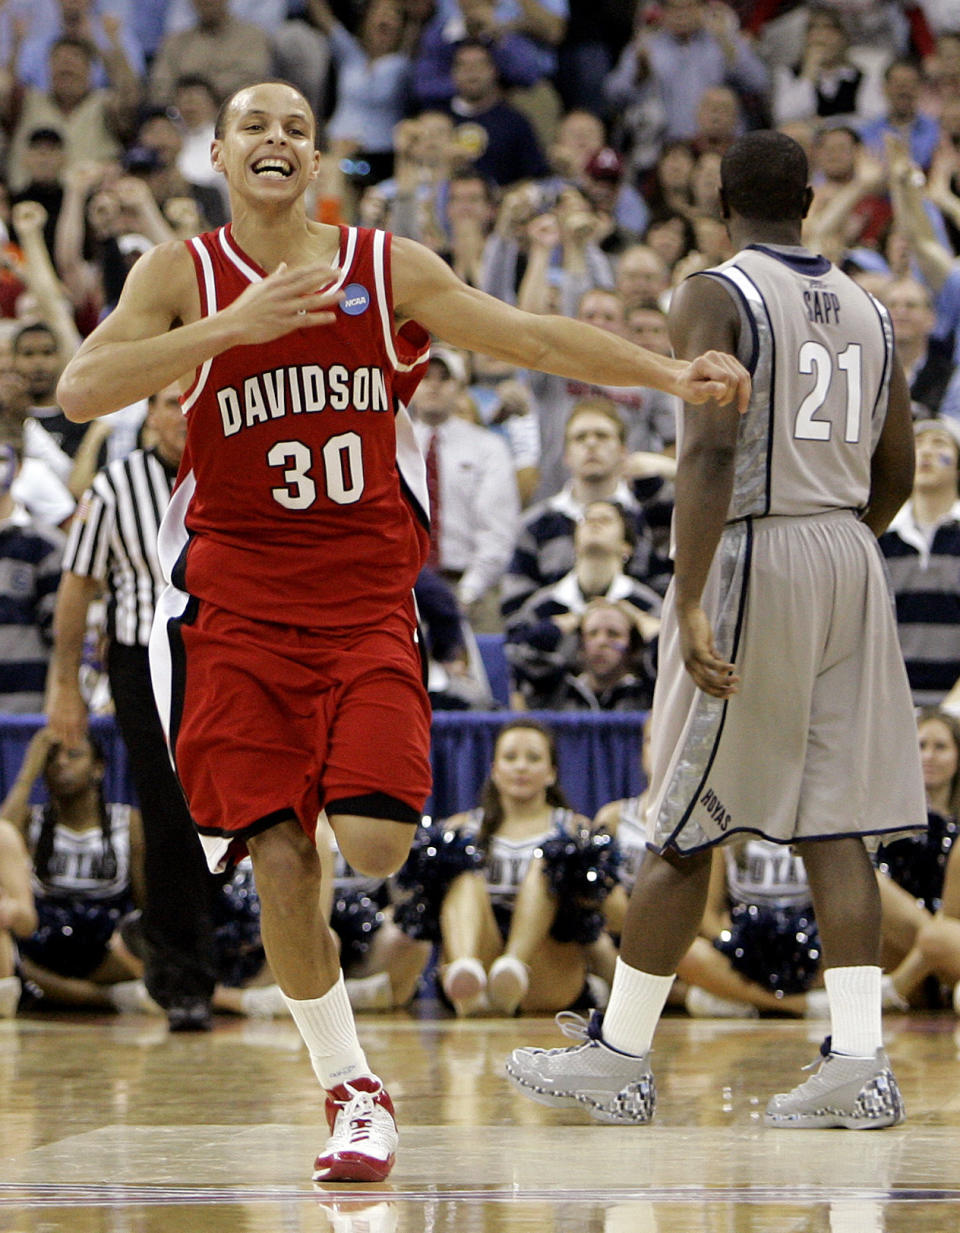 FILE - Davidson's Stephen Curry (30) celebrates as Georgetown's Jessie Sapp (21) walks away following Davidson's 74-70 win in a second-round NCAA Midwest Regional basketball game in Raleigh, N.C., Sunday, March 23, 2008. Curry lead Davidson with 30 points. (AP Photo/Chuck Burton, File)